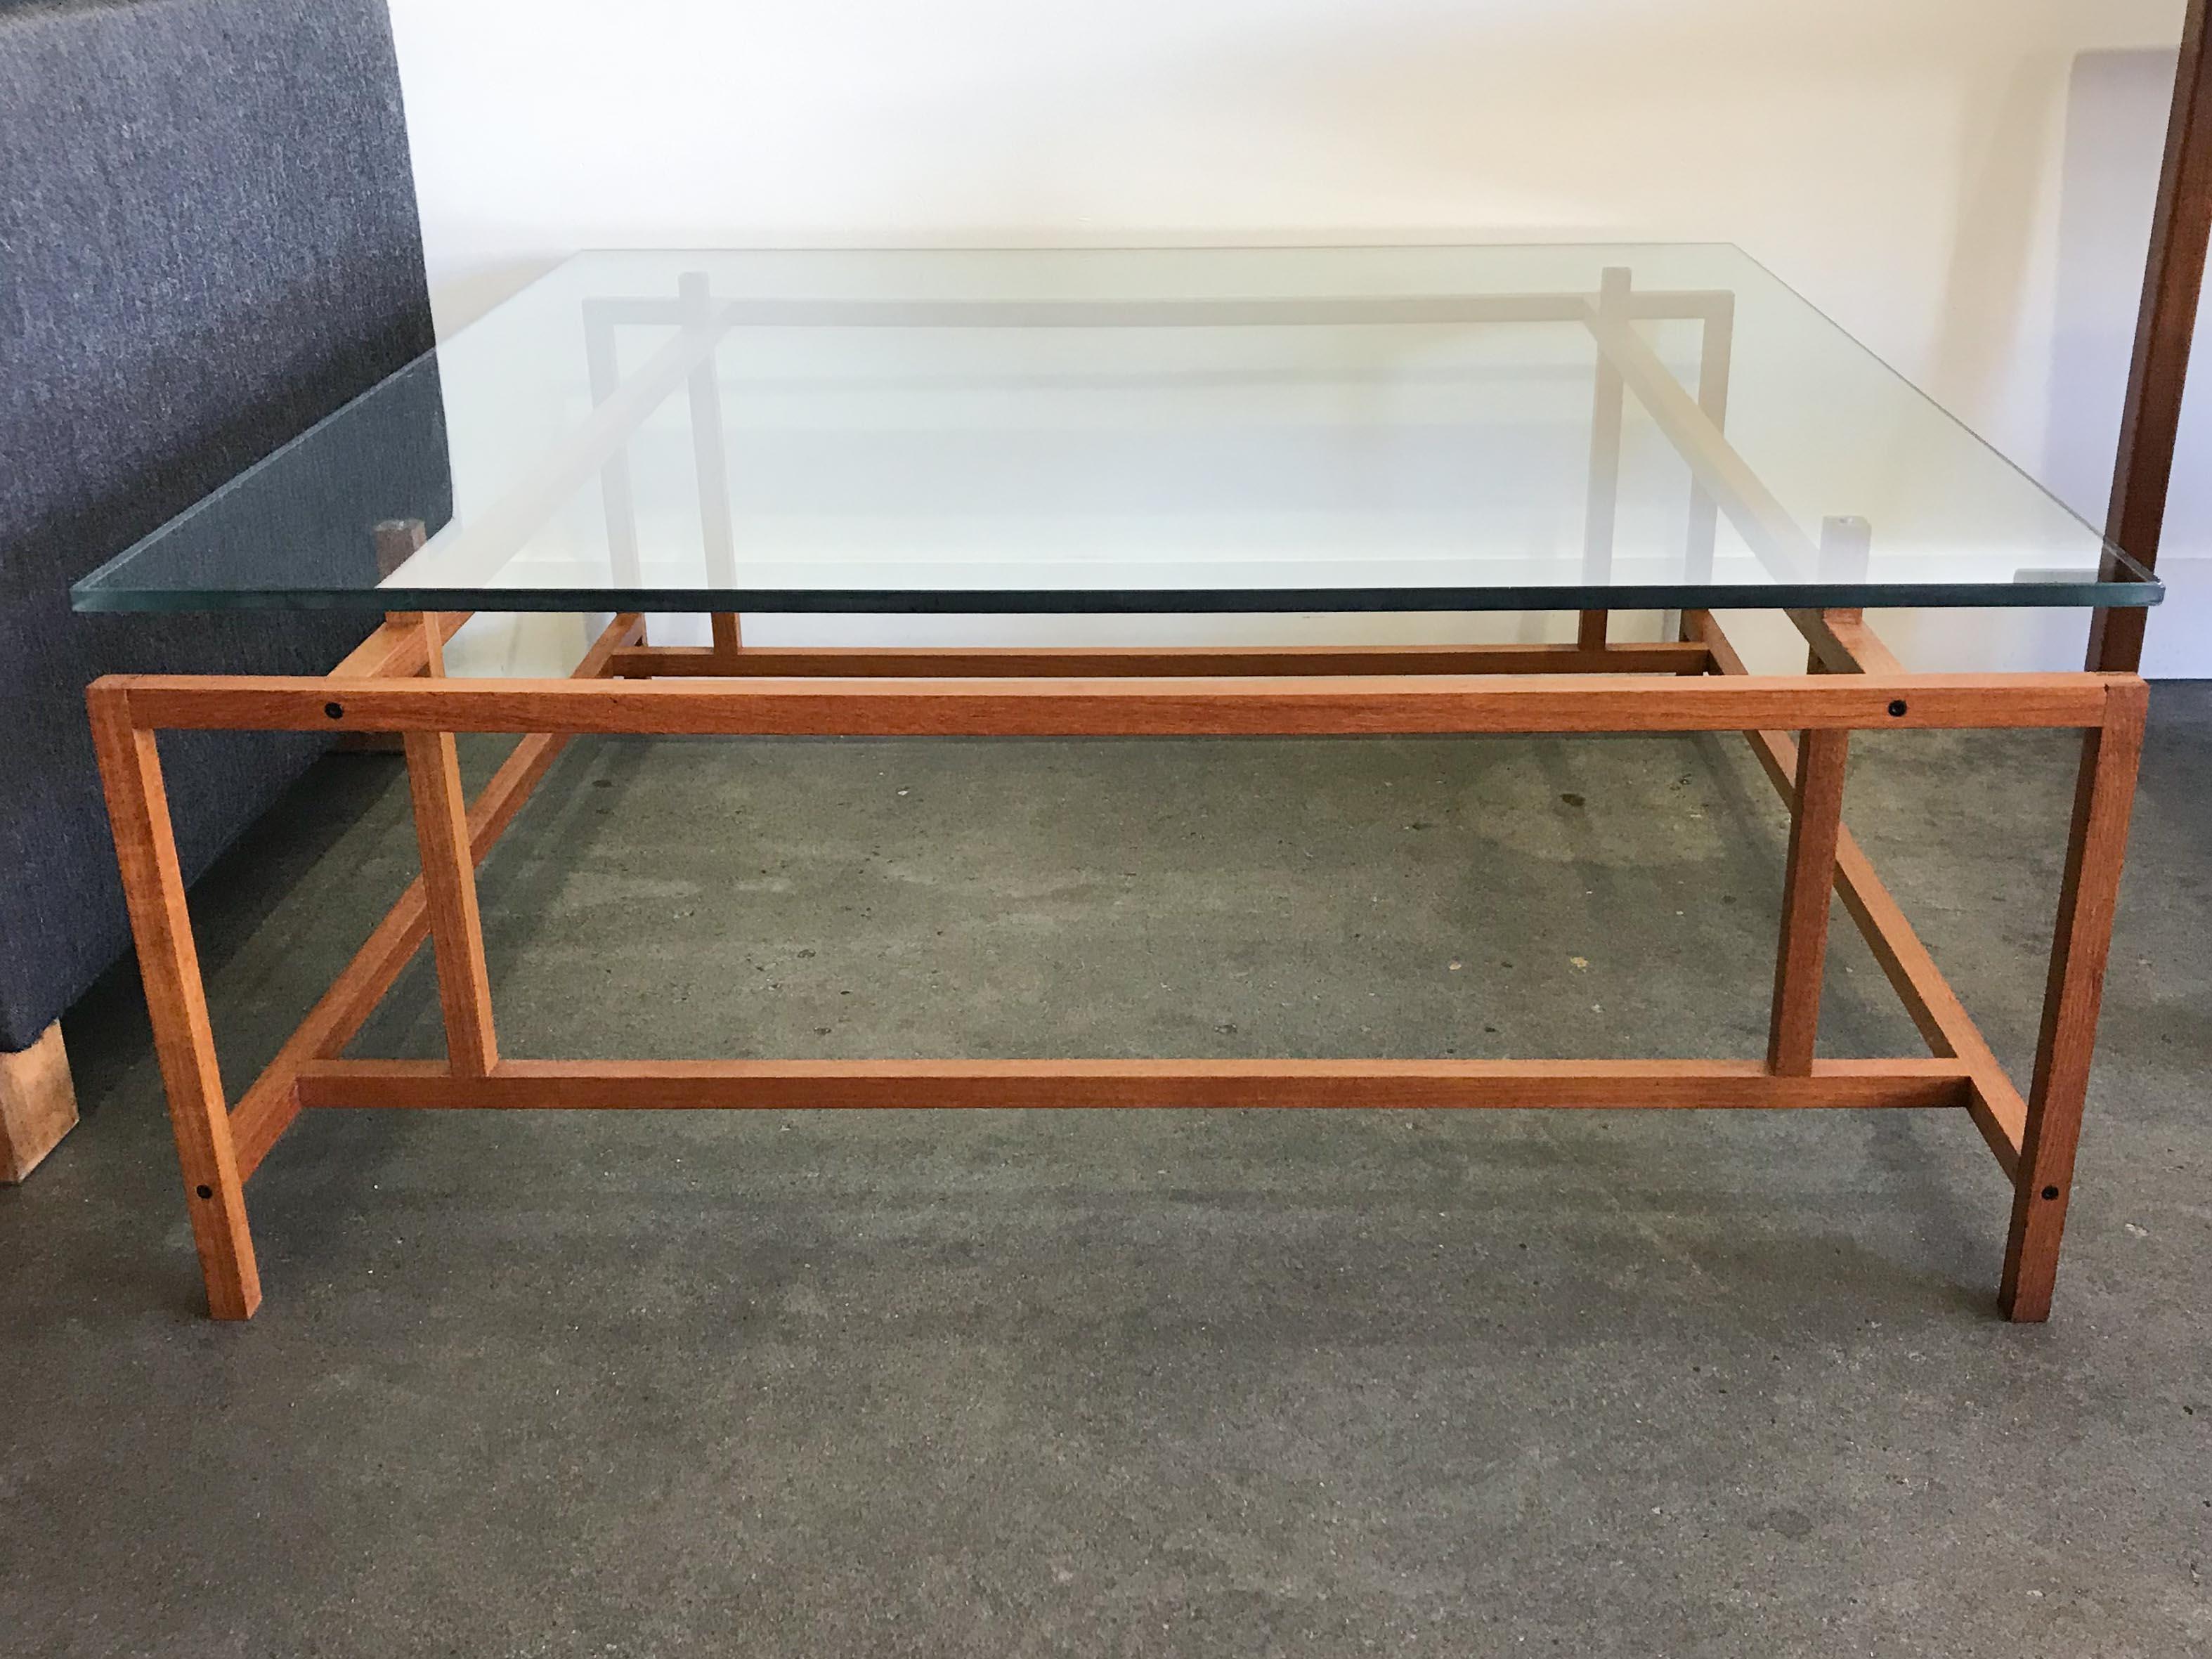 Teak coffee table by Henning Nørgaard for Komfort. Original condition with minor wear consistent with age and use. Please note the small chip in the corner of the glass.